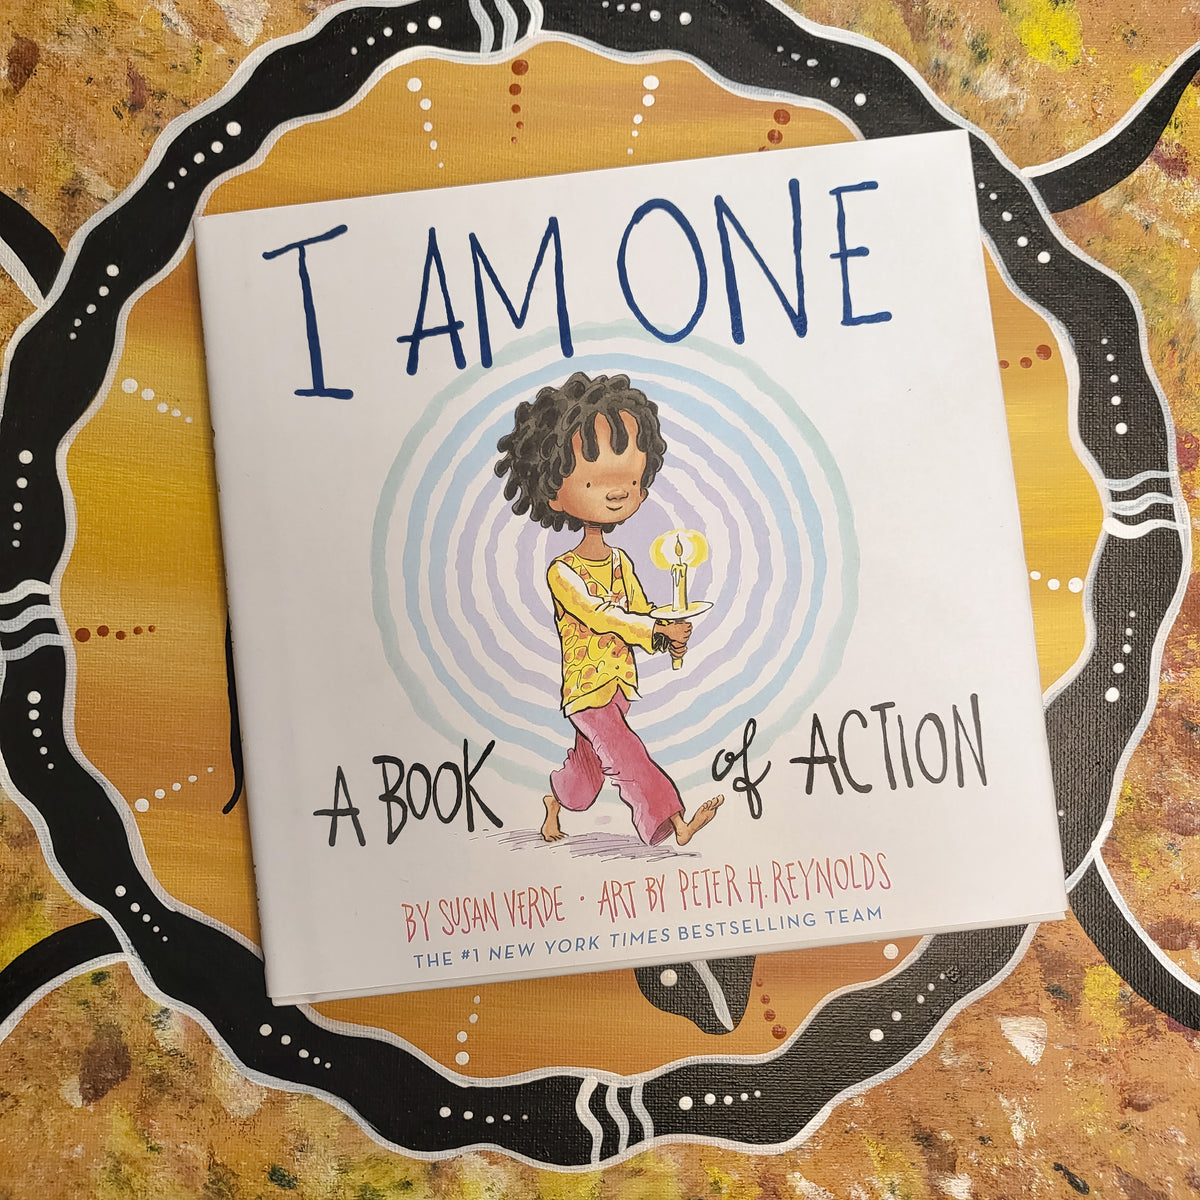 image is of a children's book called I Am One: A Book Of Togetherness.